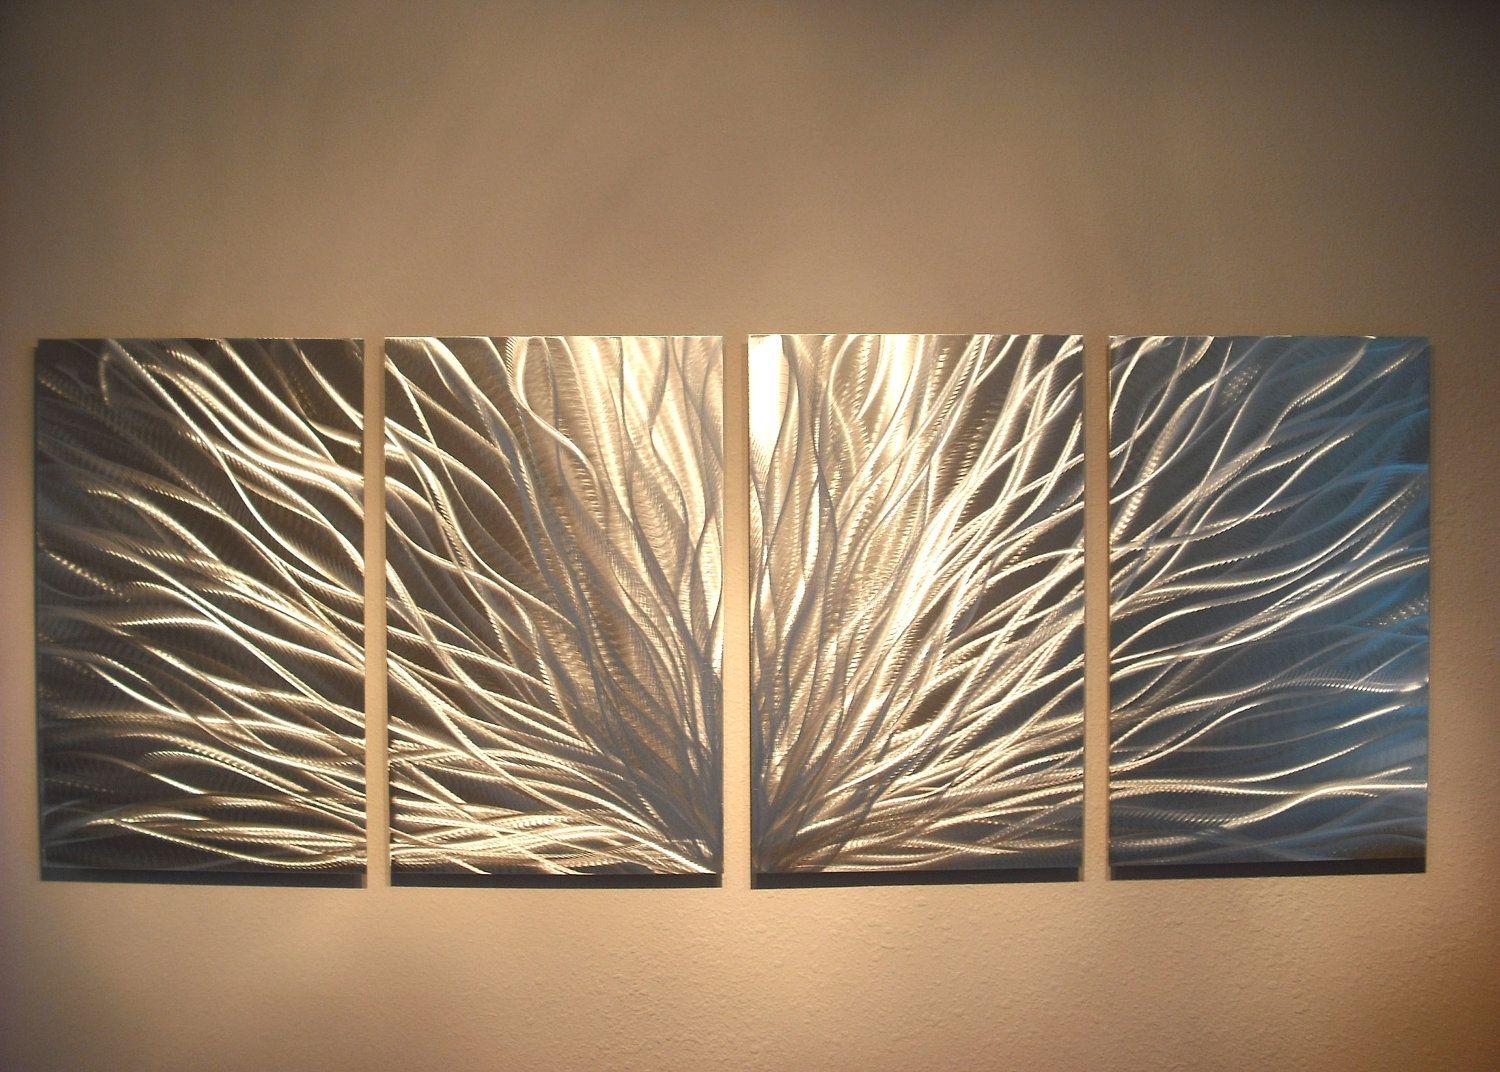 Radiance – Abstract Metal Wall Art Contemporary Modern Decor With Regard To Abstract Metal Wall Art (View 5 of 20)